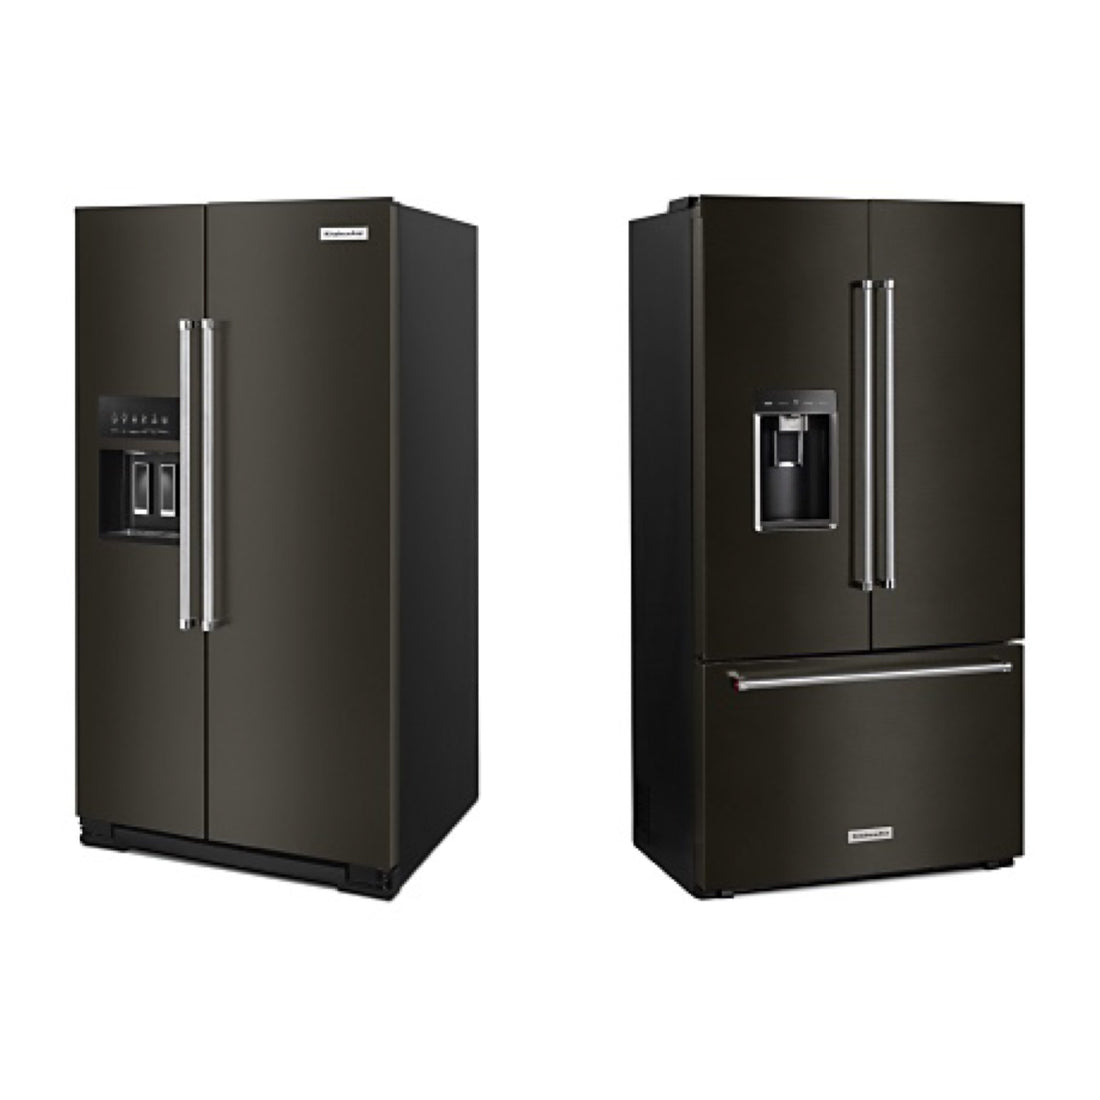 French Door vs. Side-by-side Refrigerators